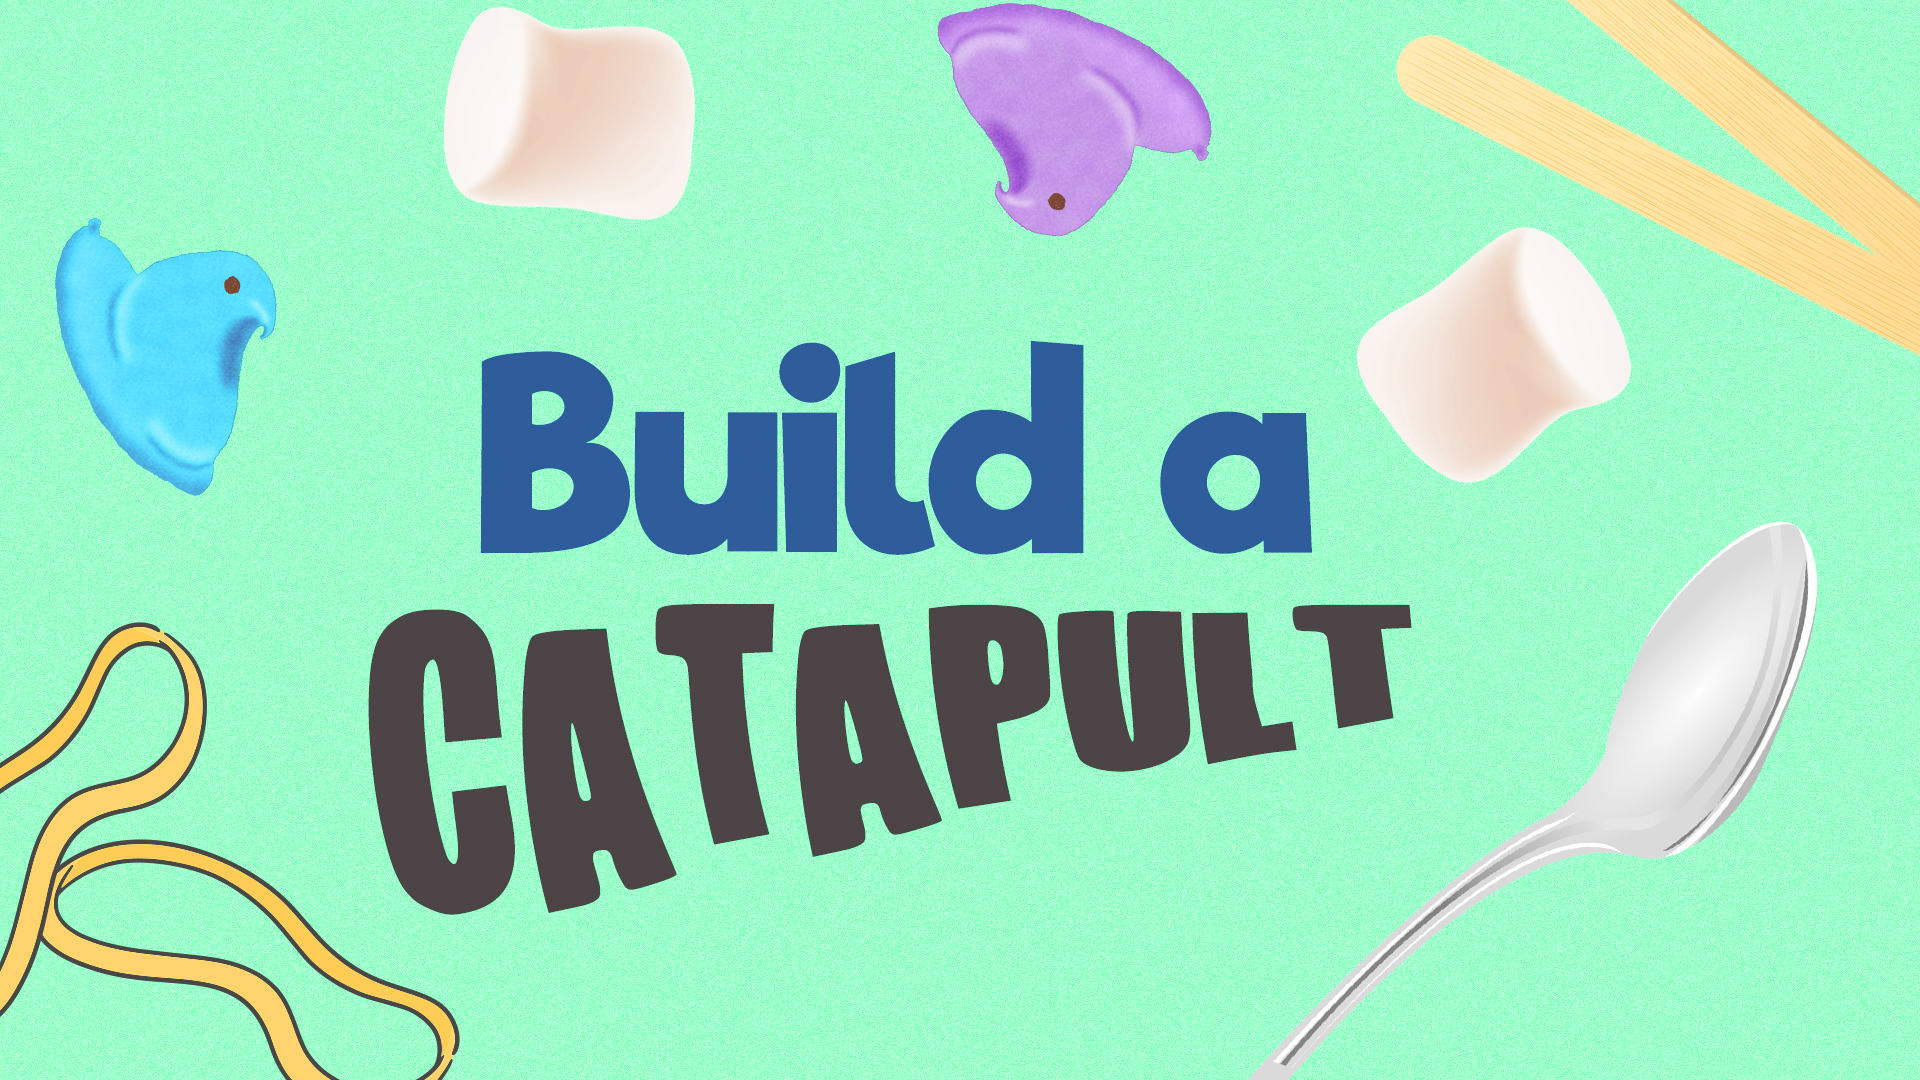 Image reads "Build a Catapult" against a green background. Marshmallows and Peeps are being launched by a spoon across the image. Two popsicle stick are in the top right corner and two rubber bands are in the bottom left corner.